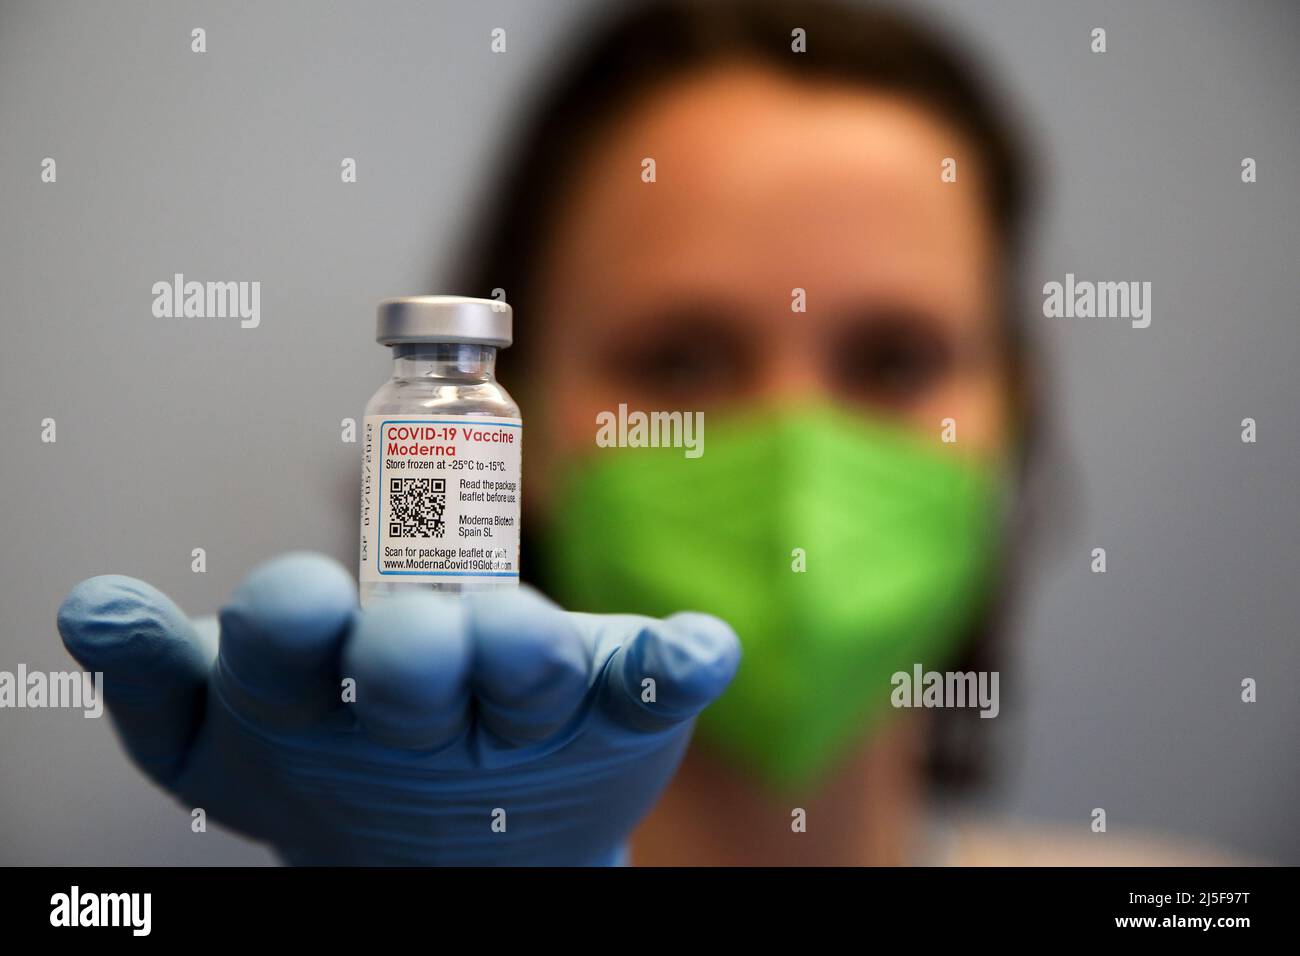 London, UK 22 Apr 2022 - A vaccinator holds a vial containing Spikevax (Moderna) COVID-19 vaccine at a vaccination centre. Credit Dinendra Haria /Alamy Live News Stock Photo